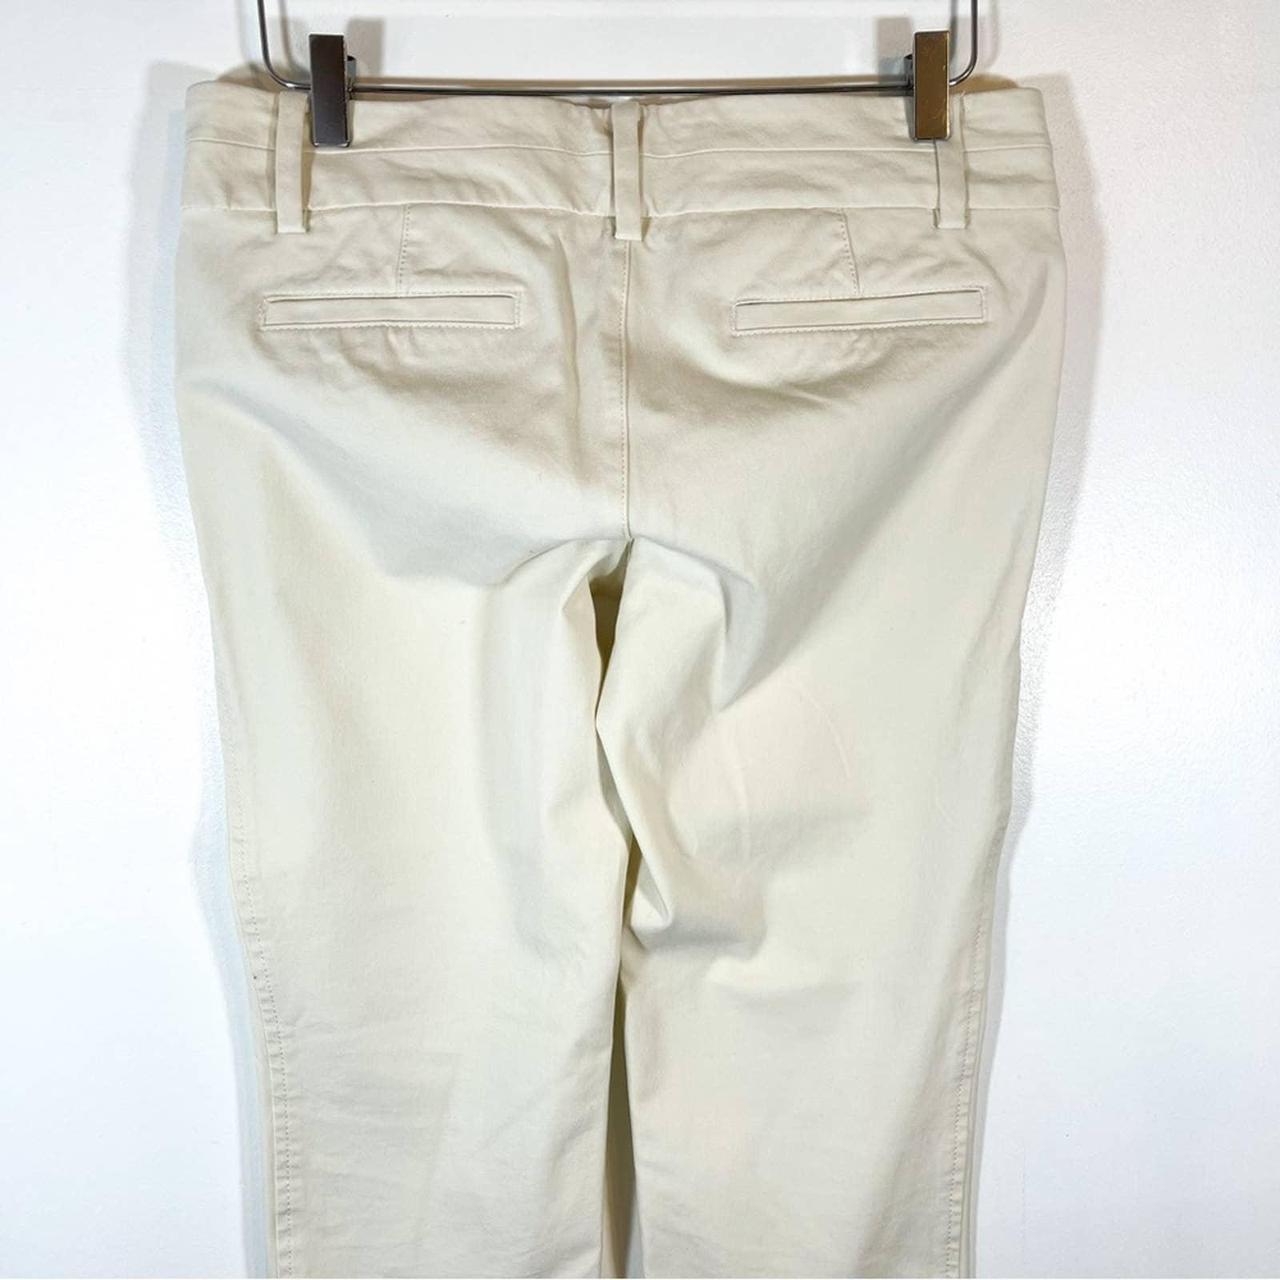 Lilly Pulitzer Women's Cream Trousers (4)